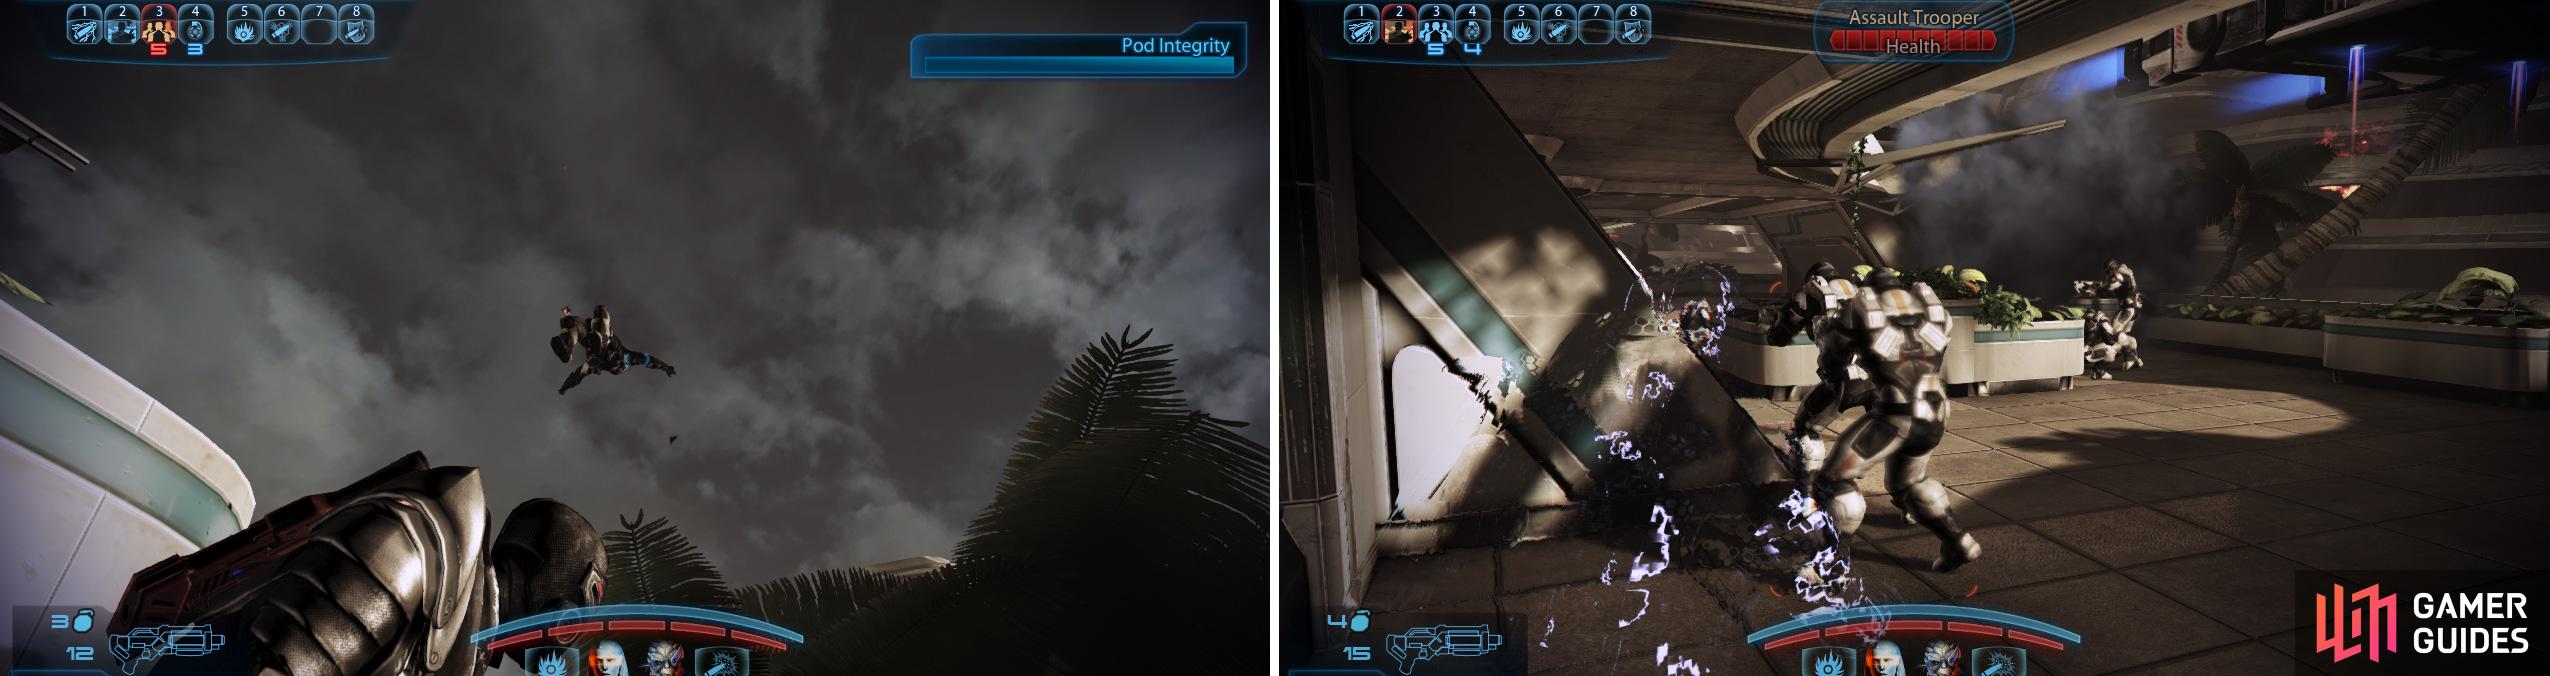 Shooting Cerberus Troops whilst they're still inside their shuttle can provide some amusing results (left). Infiltrators can use cloak to get behind the enemy and decimate their ranks (right).